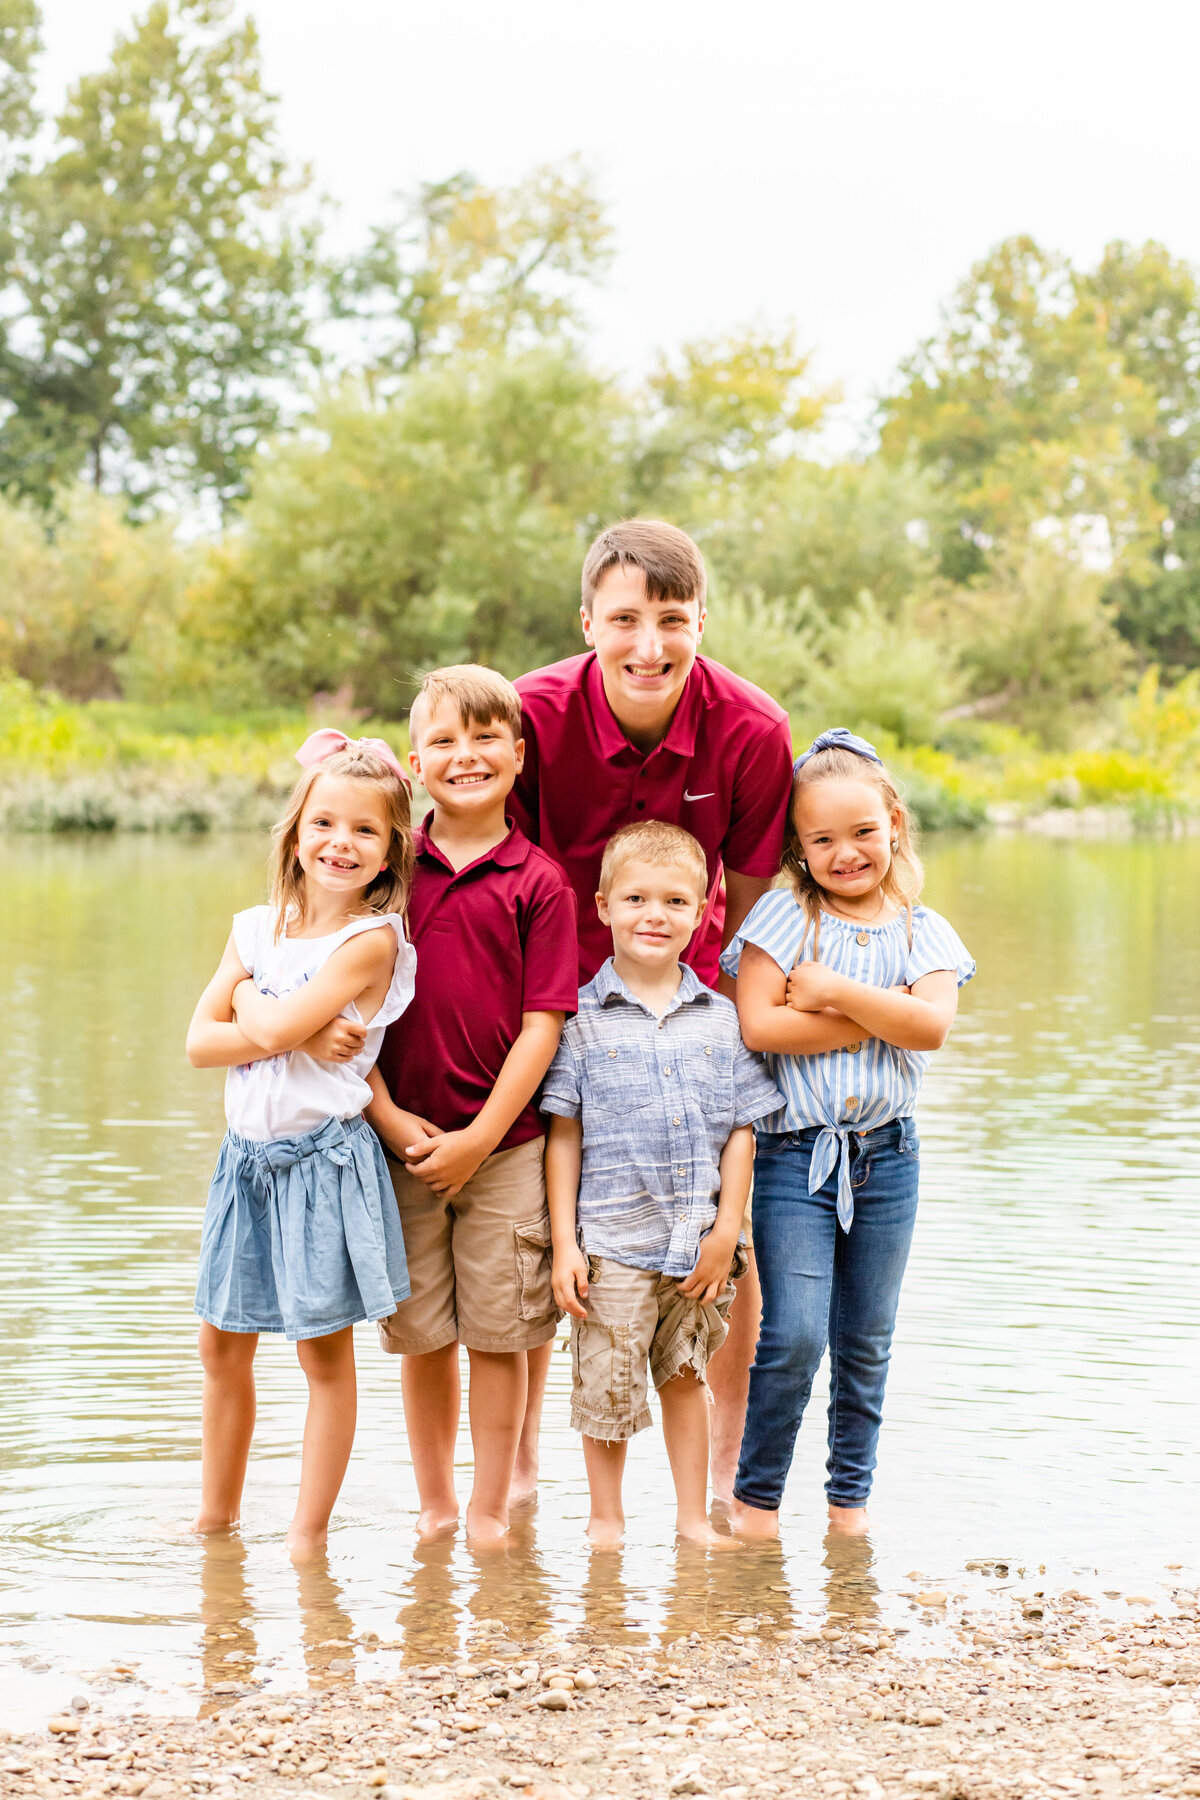 Kids standing in river smiling at camera